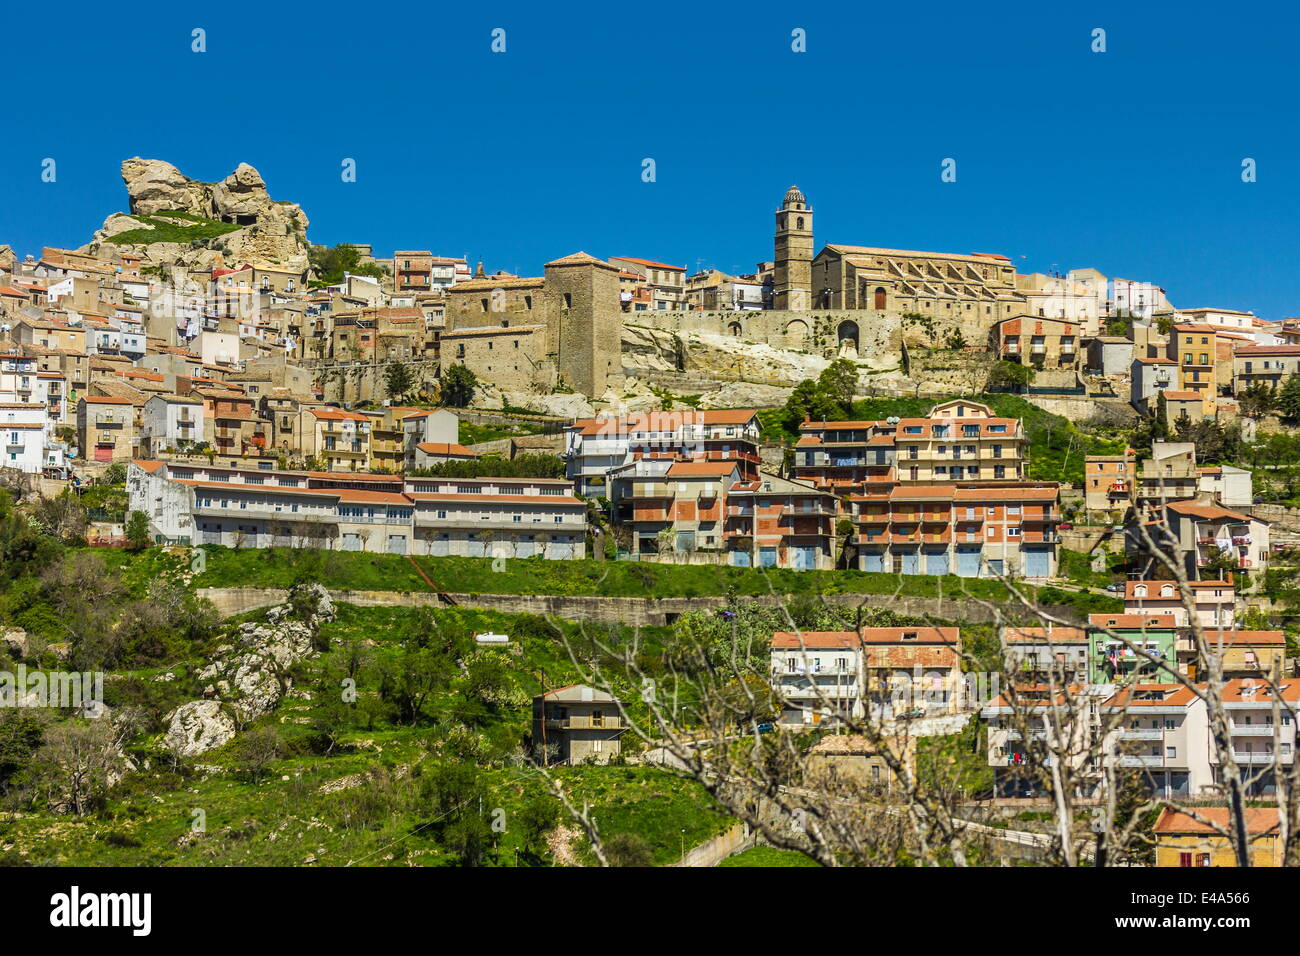 Cerami, town founded by the ancient Greeks and site of major Norman and Muslim battle, Cerami, Enna Province, Sicily, Italy Stock Photo